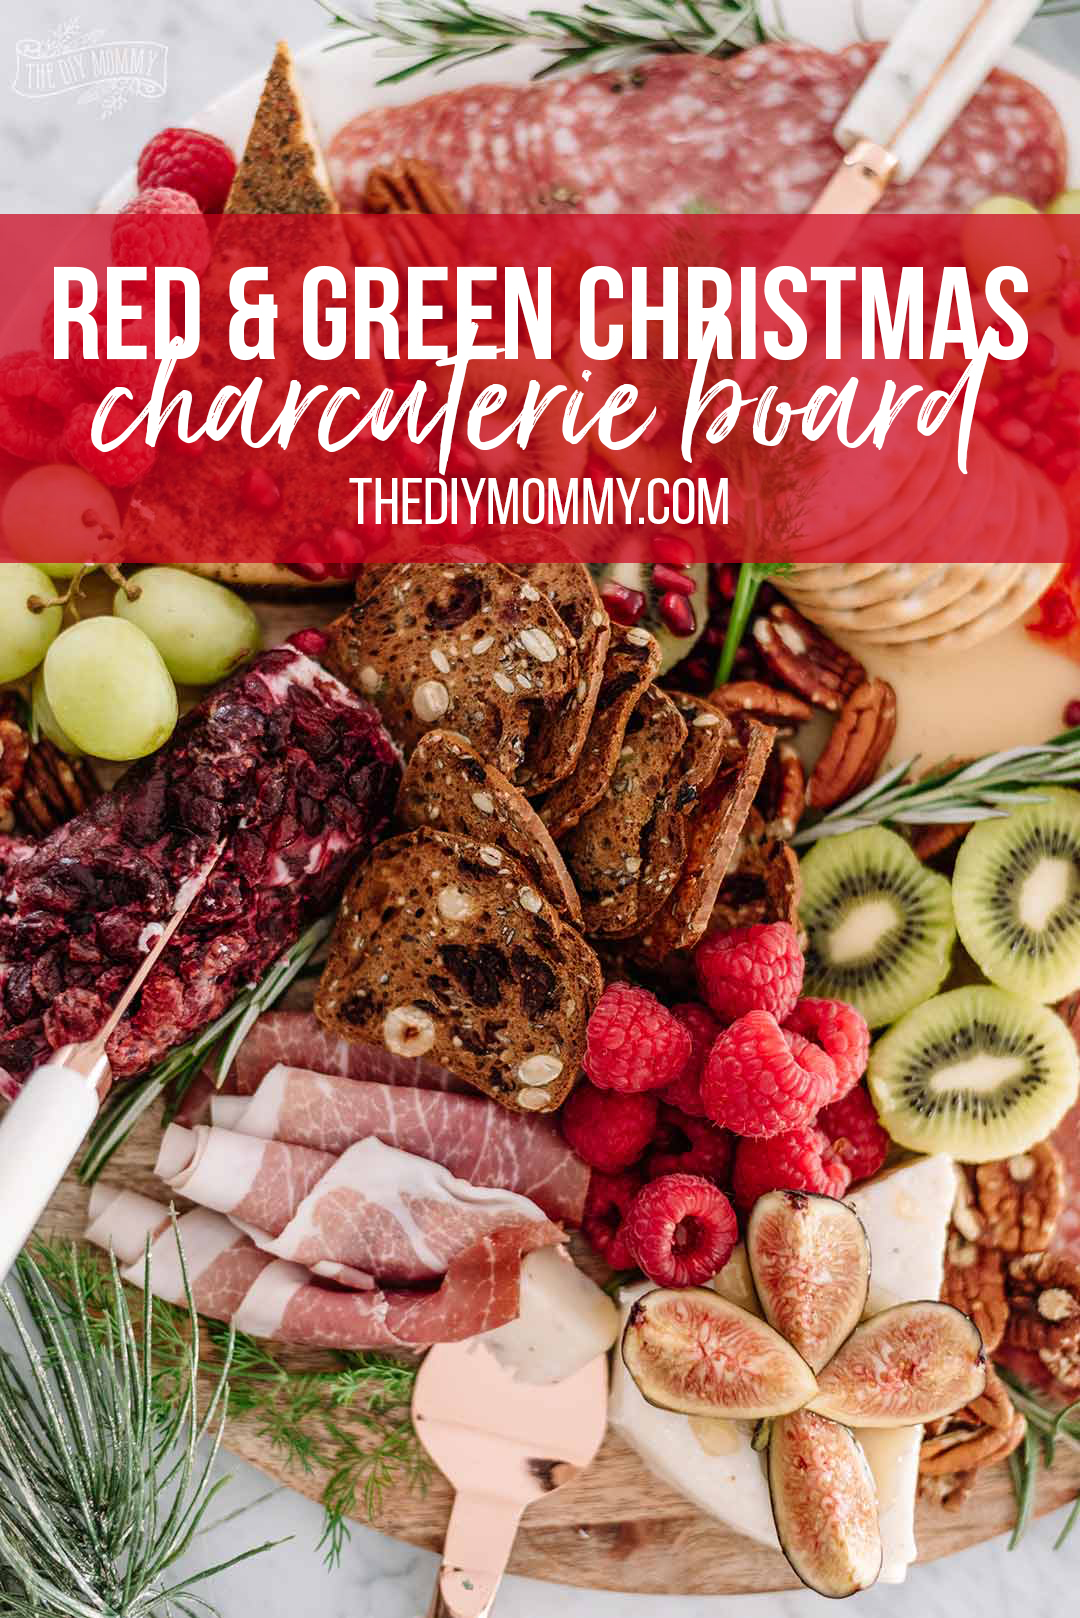 How to make an epic Christmas charcuterie cheese board in red & green